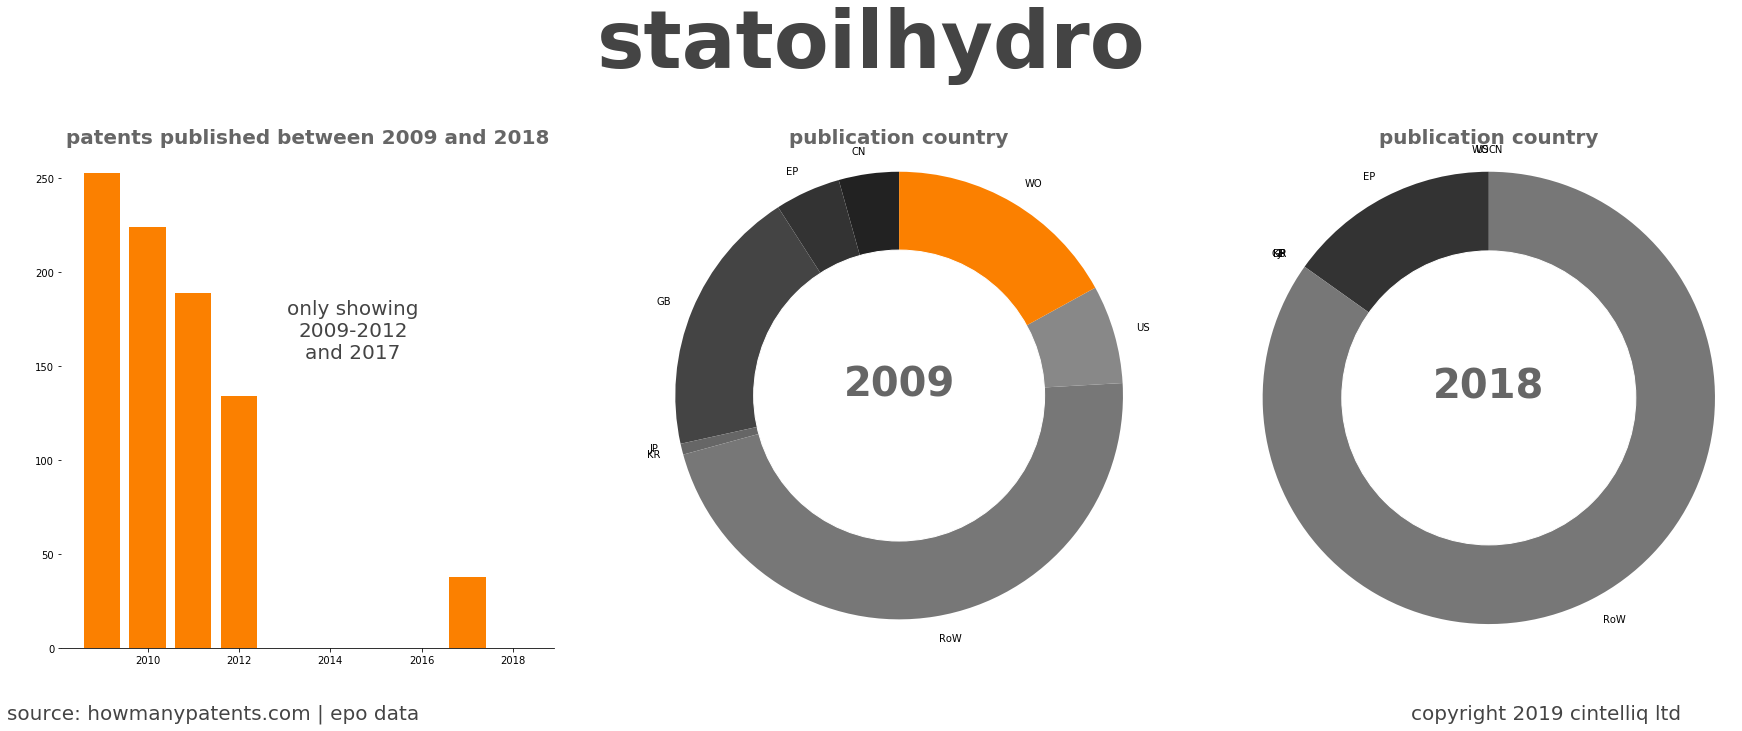 summary of patents for Statoilhydro